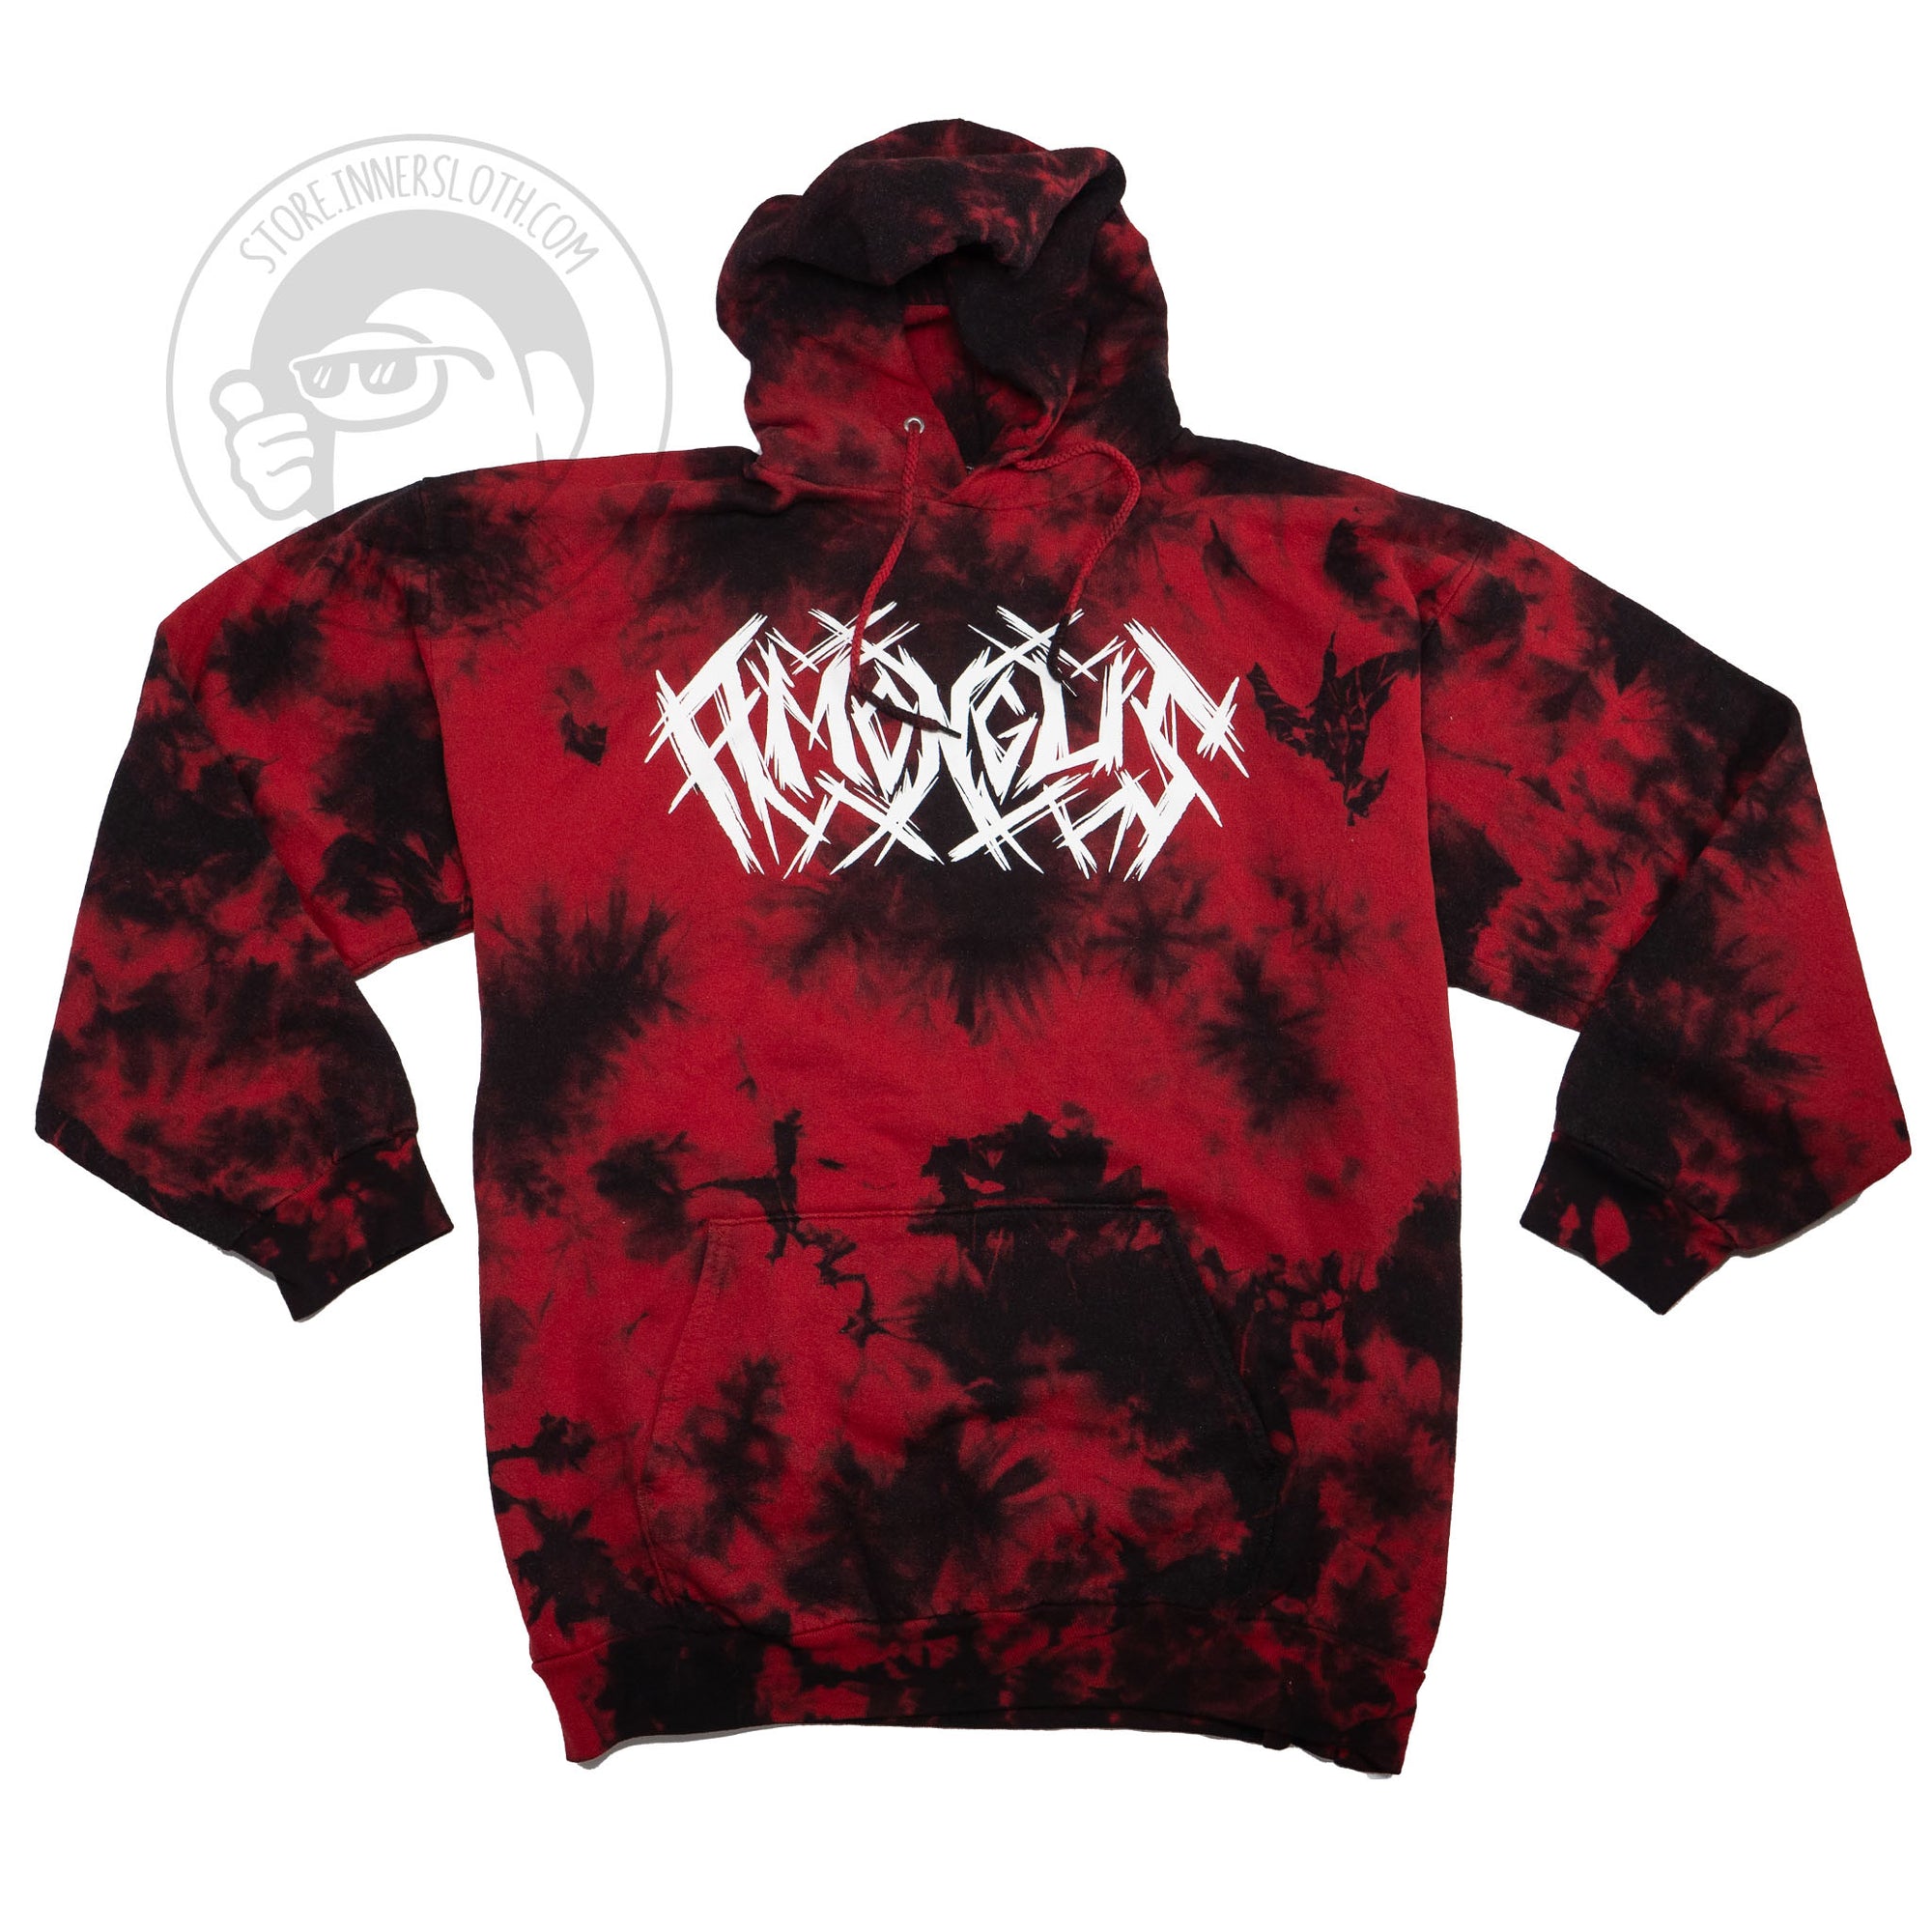 A flat lay photograph of the front of the Metal Red Pullover hoodie on a white background. The garment base is a patchy red and black tie-dye with the words “Among Us” screenprinted in a metal music-esque font across the front in white ink. 